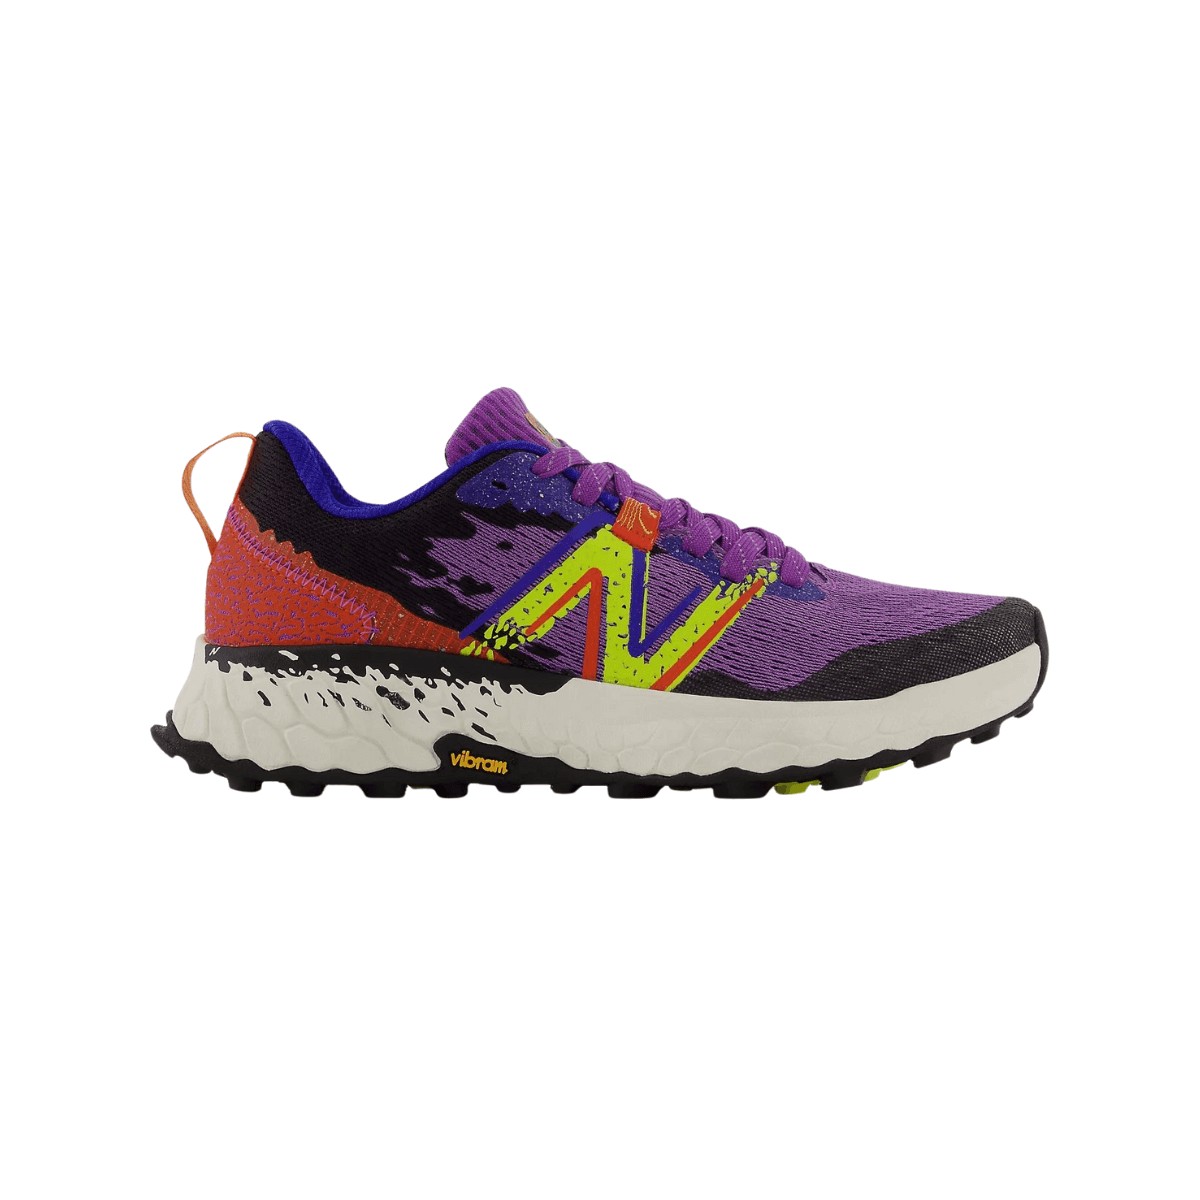 Chaussures New Balance Fresh Foam X Hierro V7 Violet Rouge Femme SS22, Taille 37 - EUR